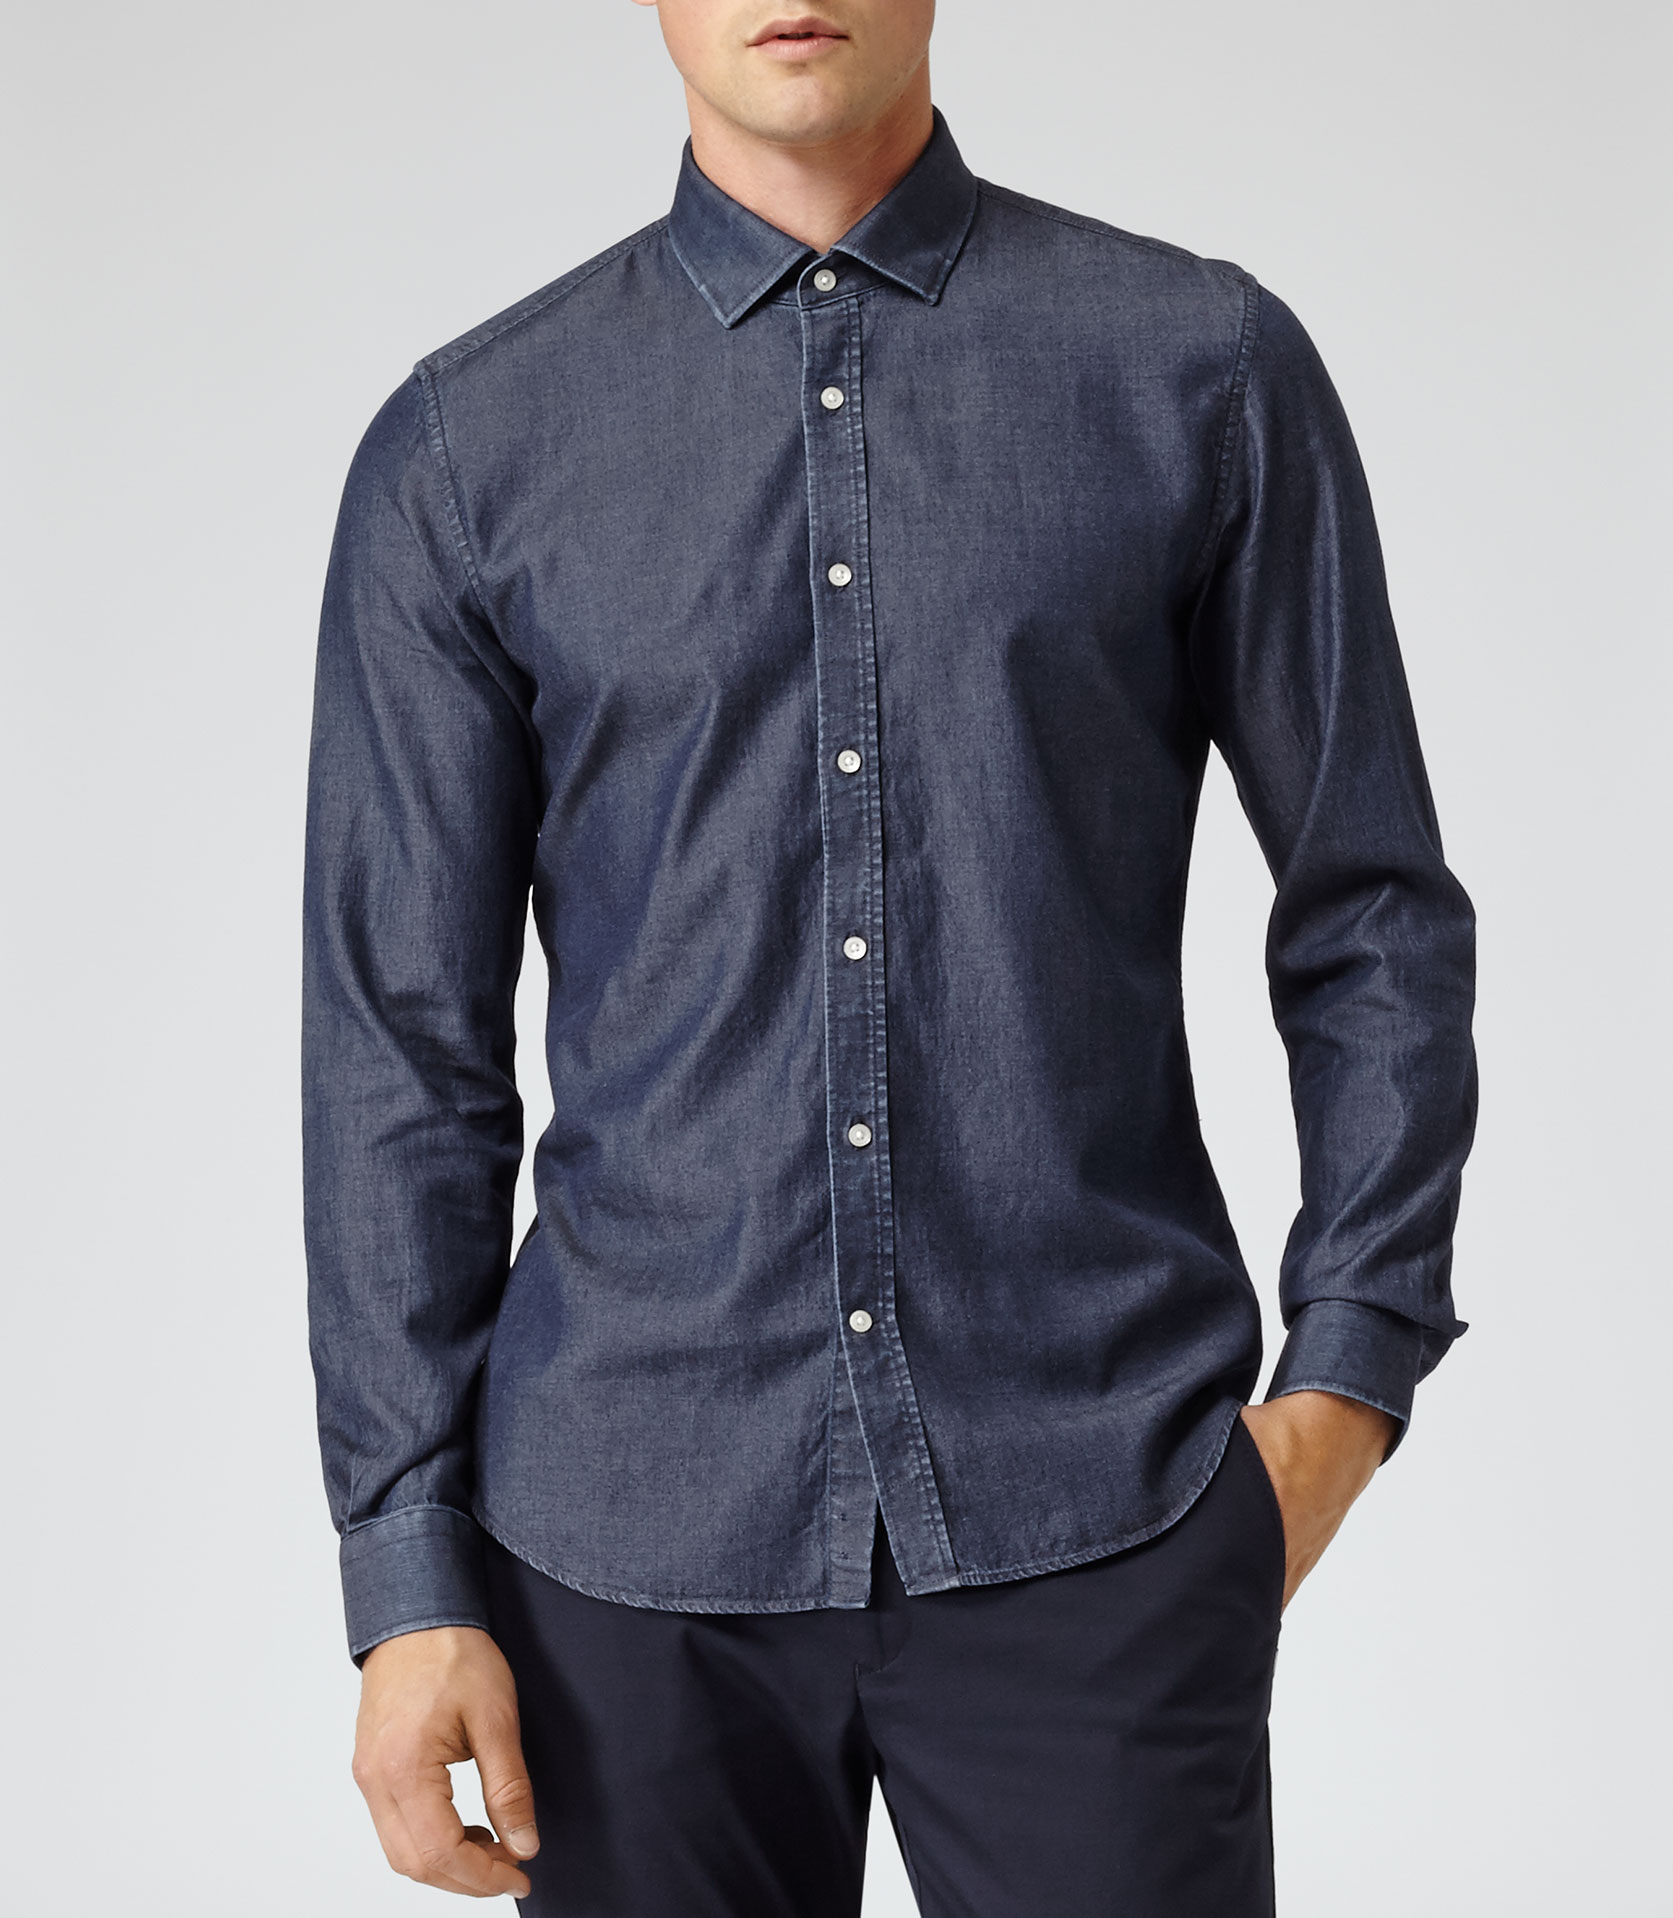 Reiss Rhodes Slim-Fit Chambray Shirt in Navy (Blue) for Men - Lyst